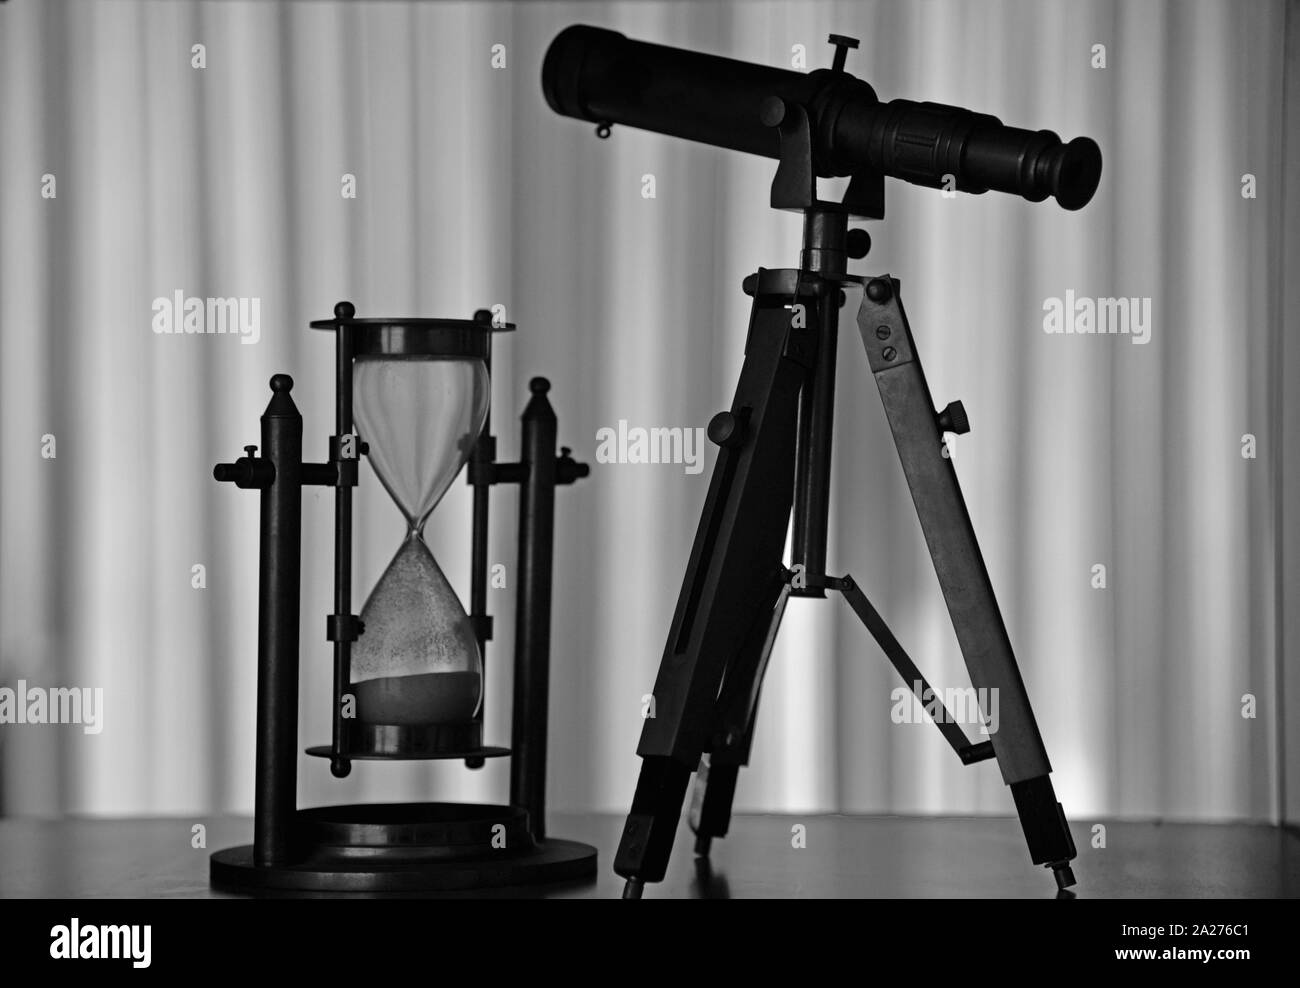 Silhouettes of a Hourglass and a telescope on a bookcase shelf. Concept : technology, exploration, science, observation, time etc. Stock Photo